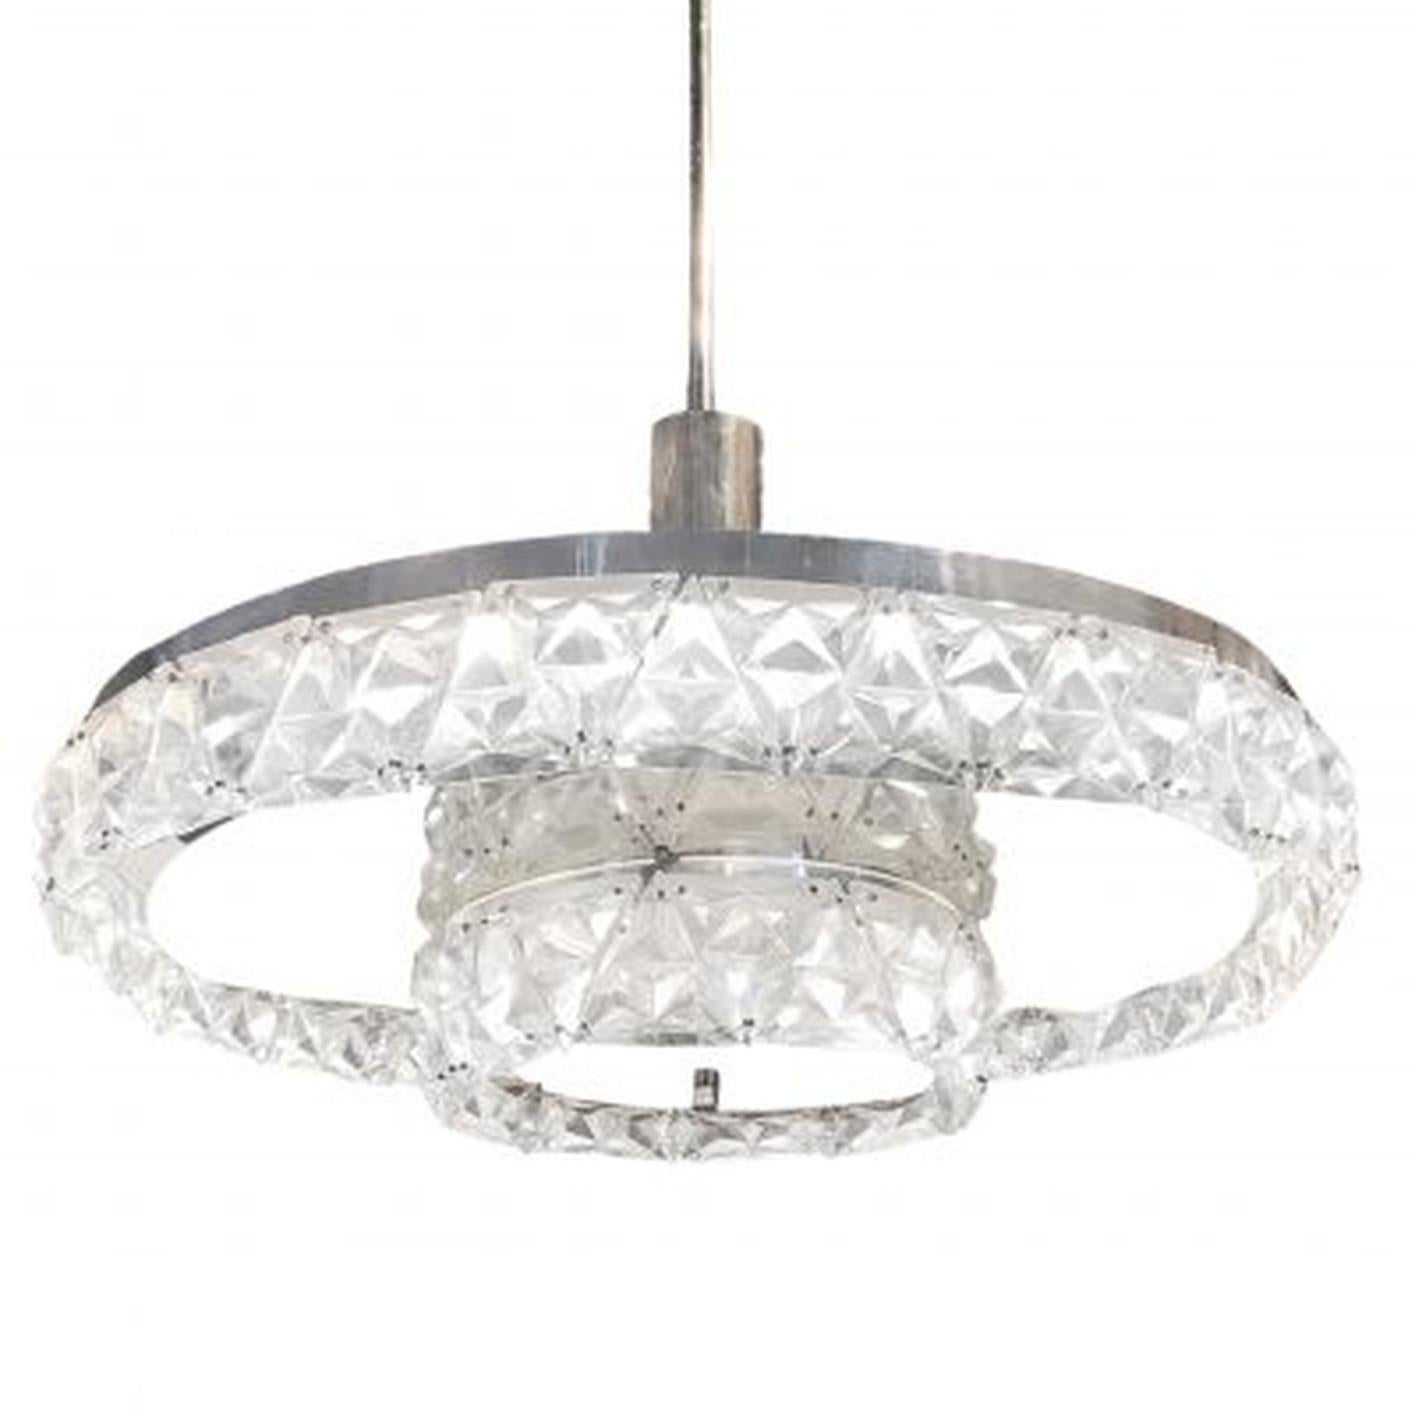 Hand-Crafted 20th Century Swedish Orrefors Glass Ceiling Lamp, Pendant by Carl Fagerlund For Sale